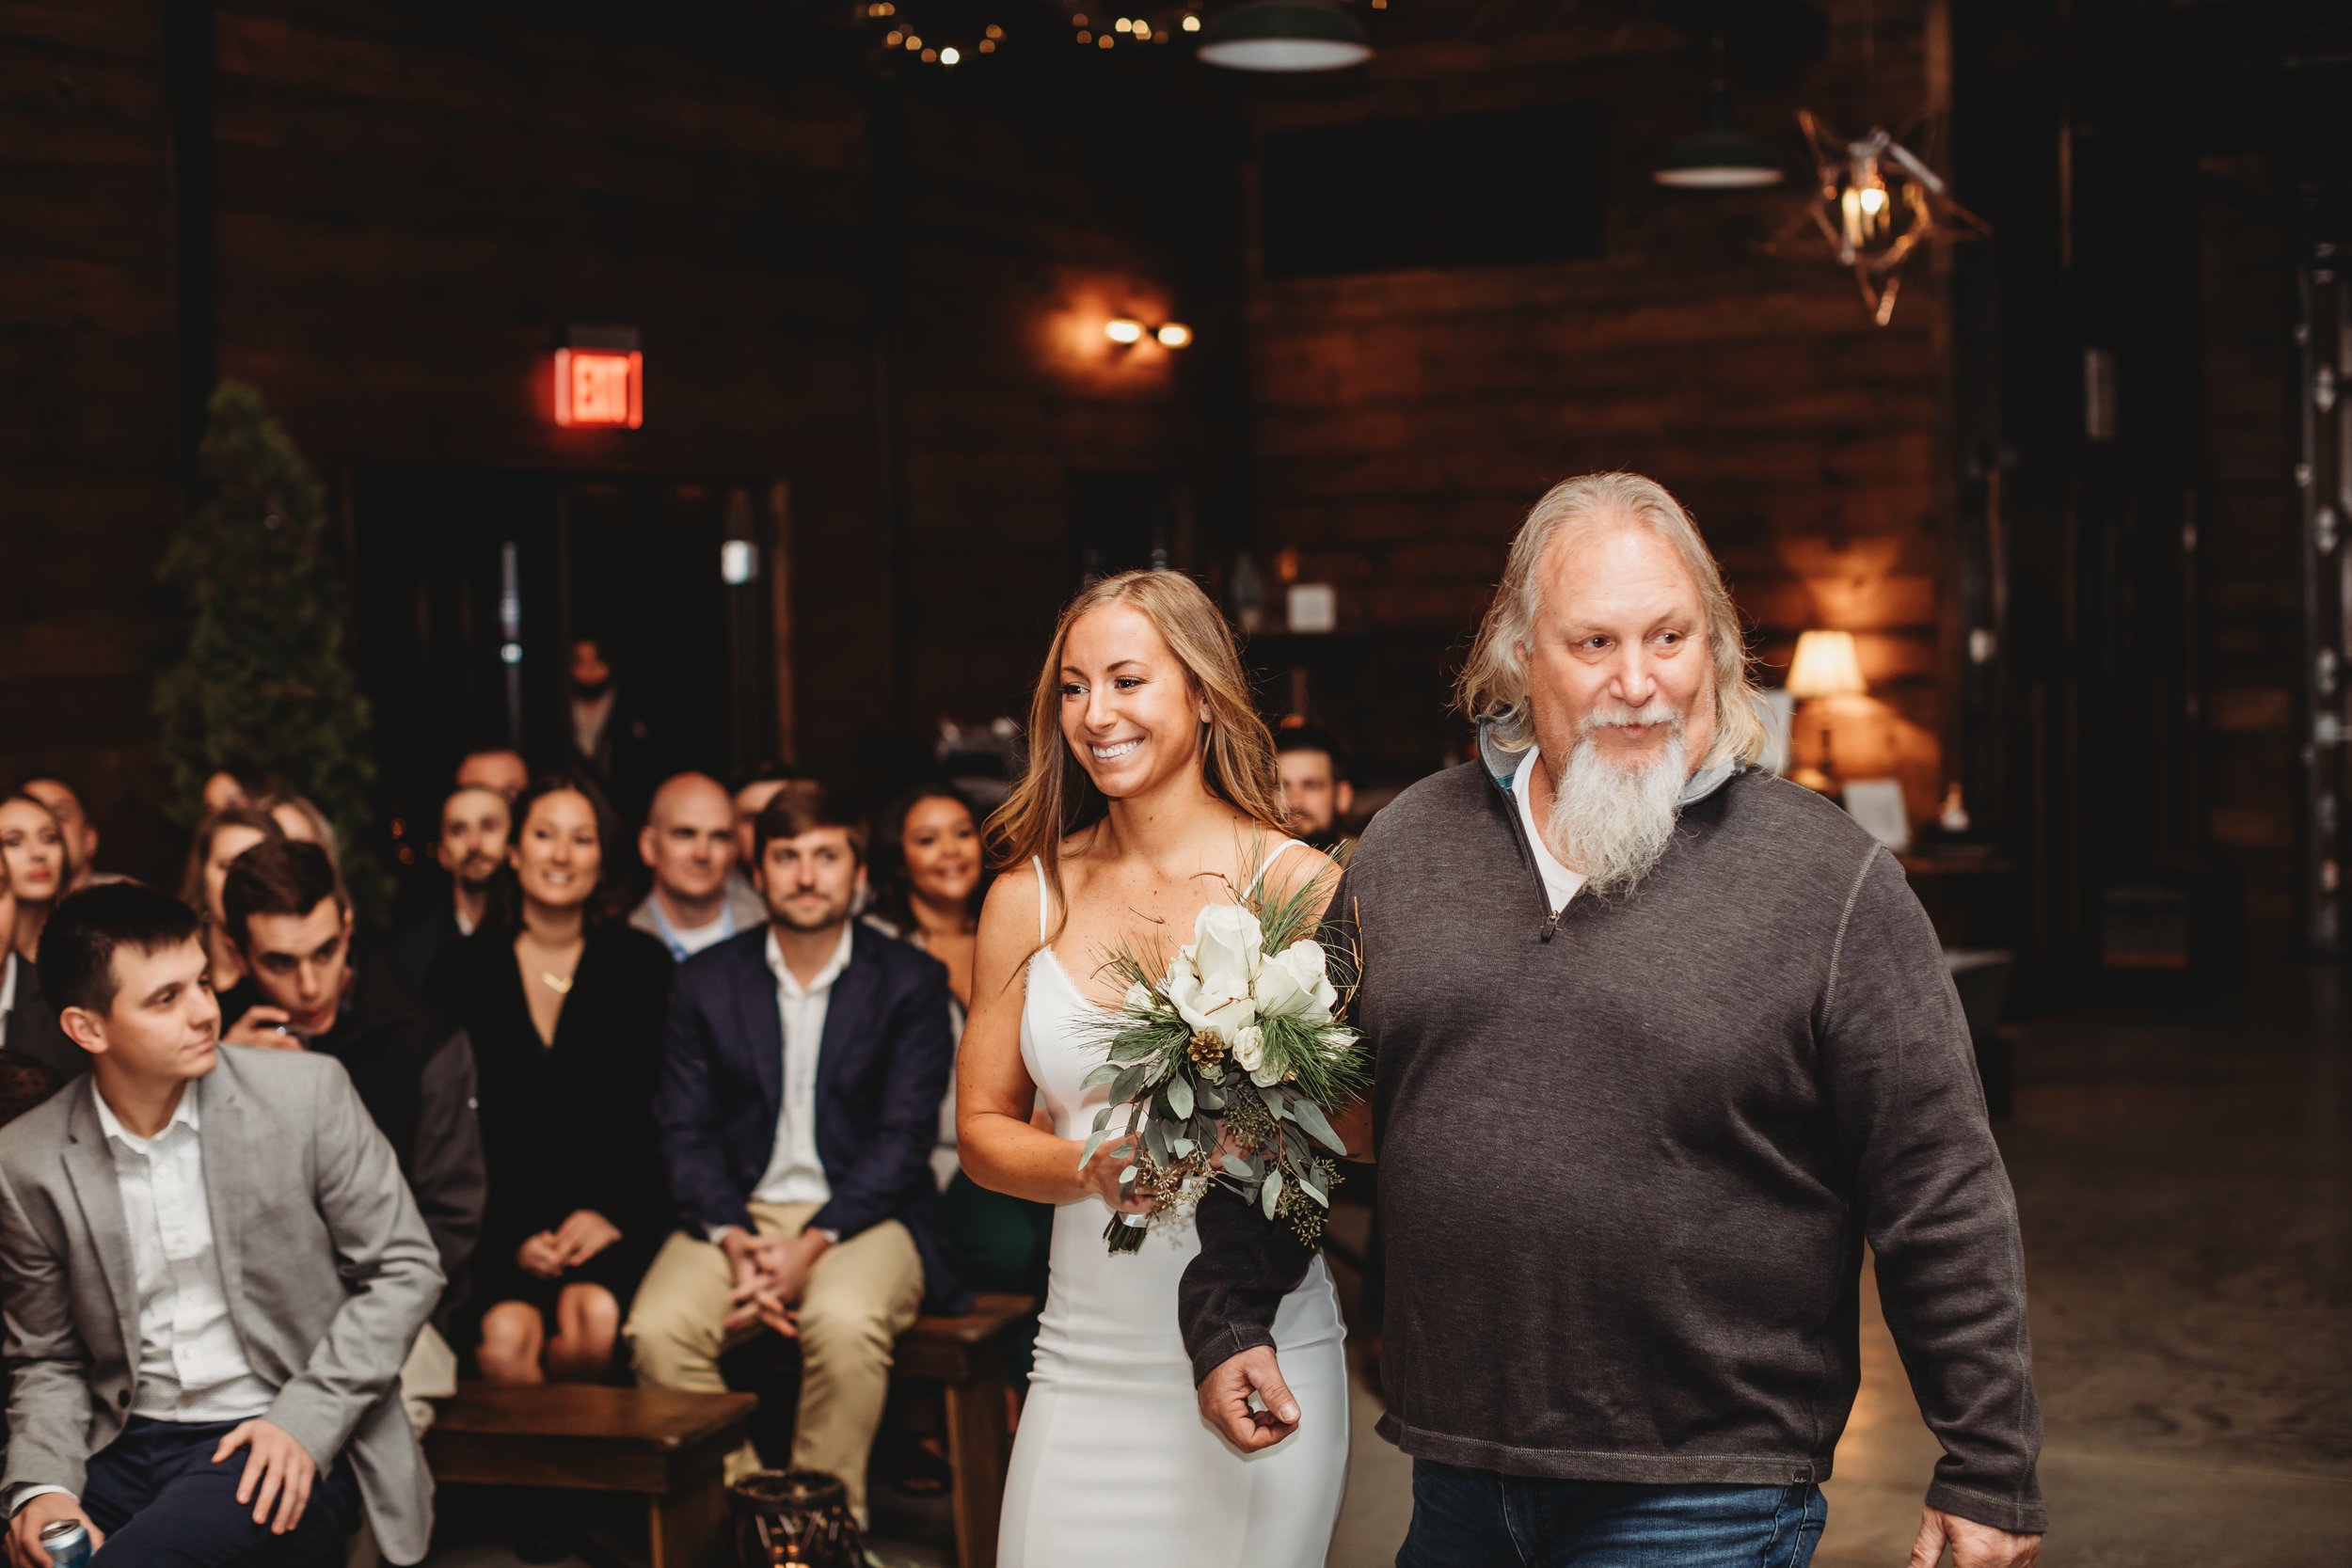  Teala Ward Photography captures a bride walking down the aisle with her in a cabin in LaSalle, IL. cabin wedding simple wedding gown #tealawardphotography #tealawardweddings #LaSalleIllinois #IronwoodontheVermillion #weddingphotographyIL 